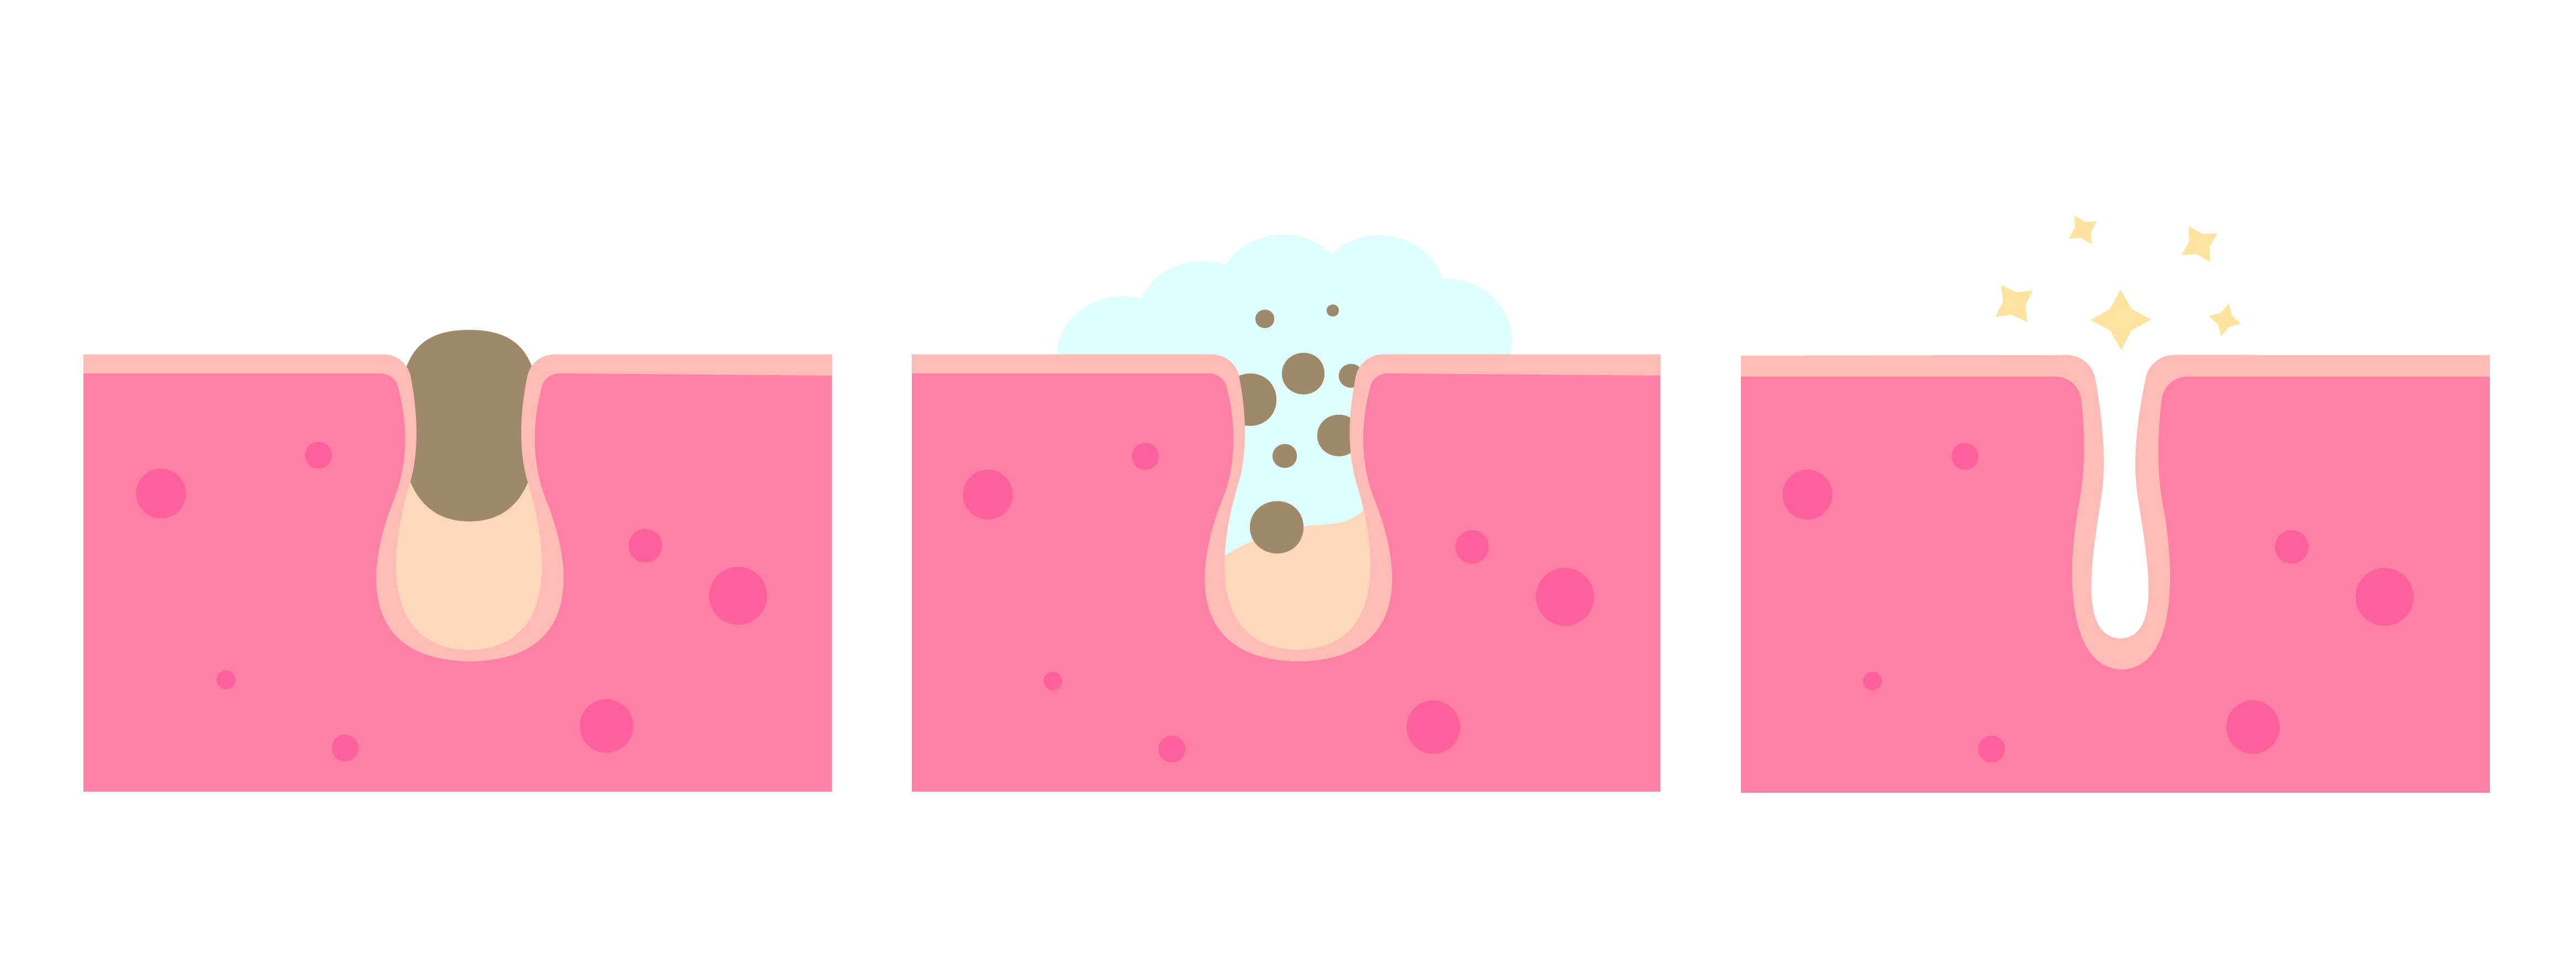 illustration on how cleansing removes sebum, dirt, and germs